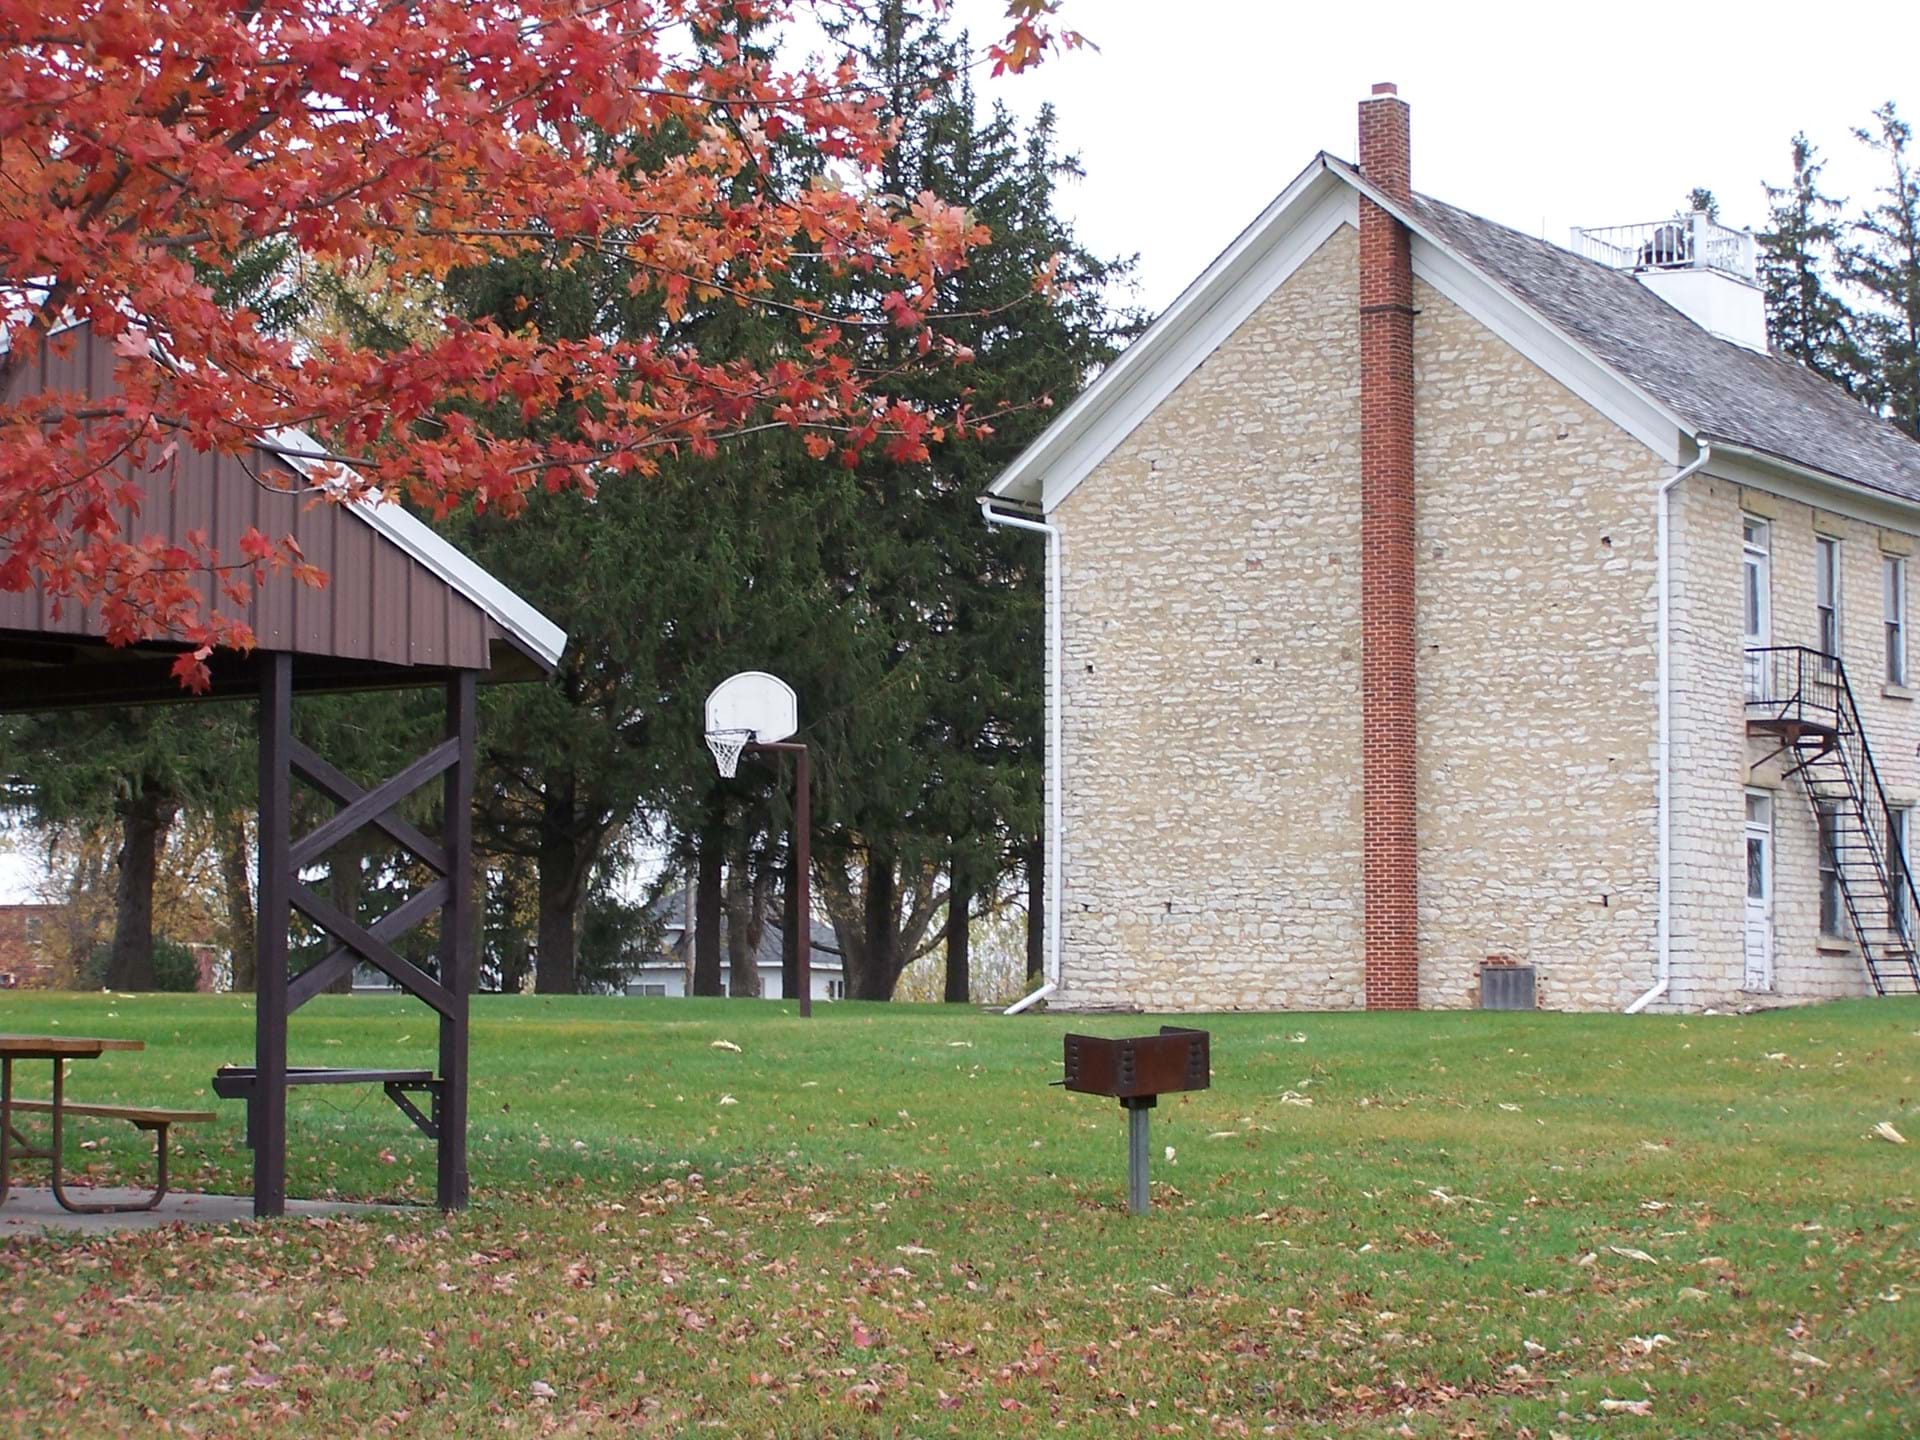 A view of the old schoolhouse at frankvilel park